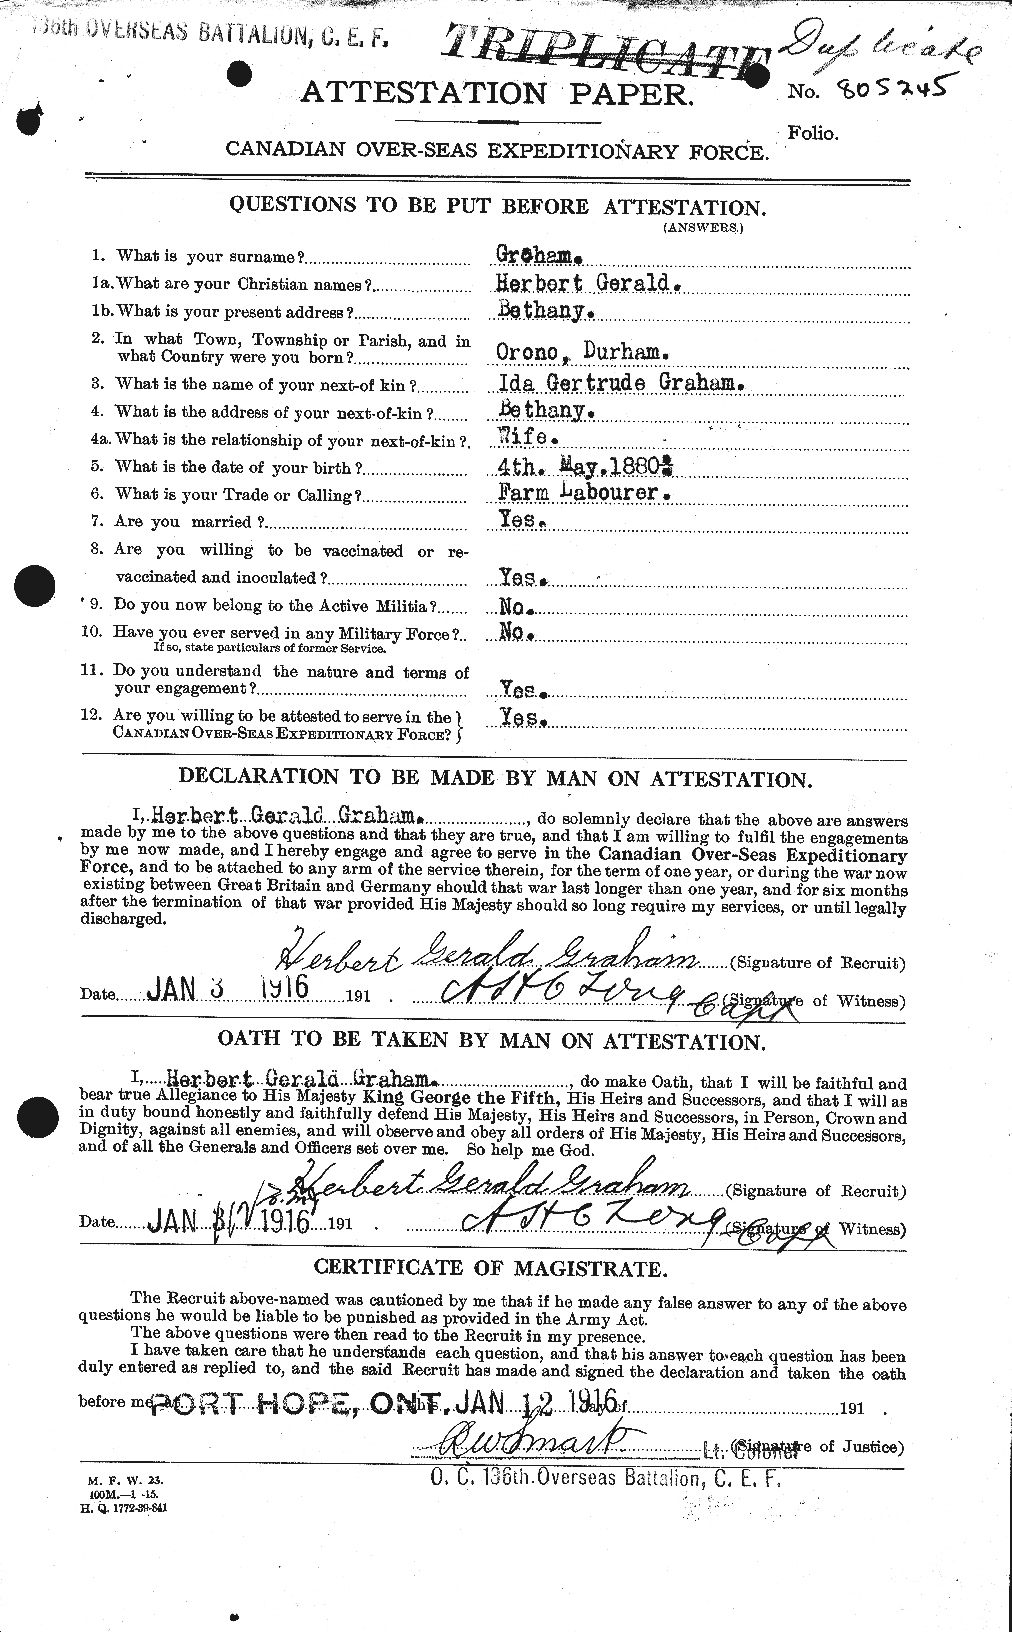 Personnel Records of the First World War - CEF 357744a